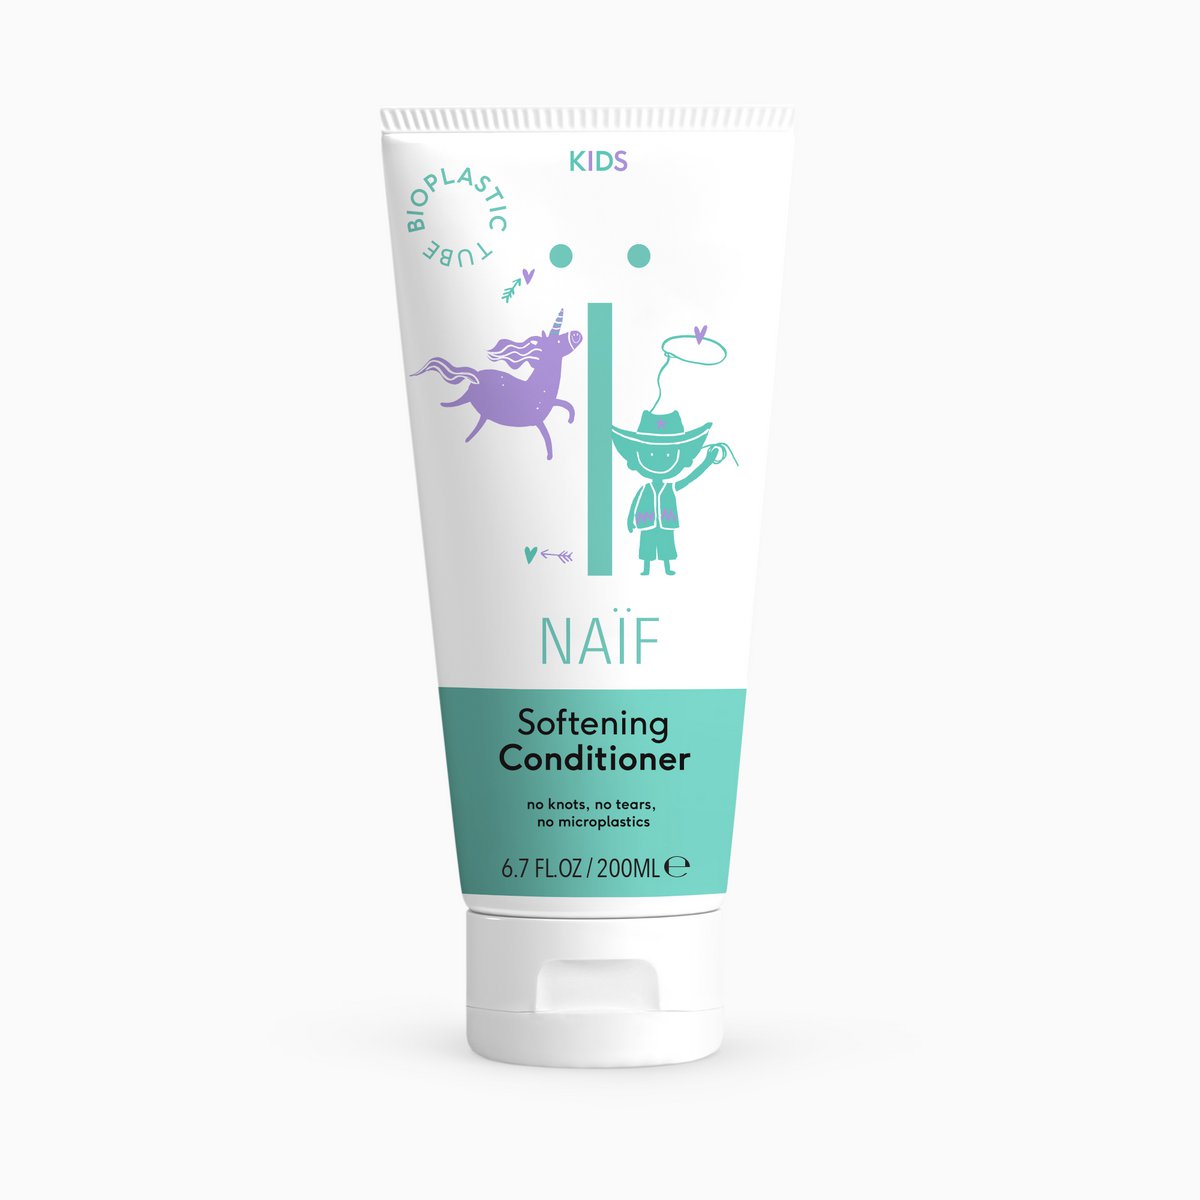 NAIF - Softening Conditioner for Kids